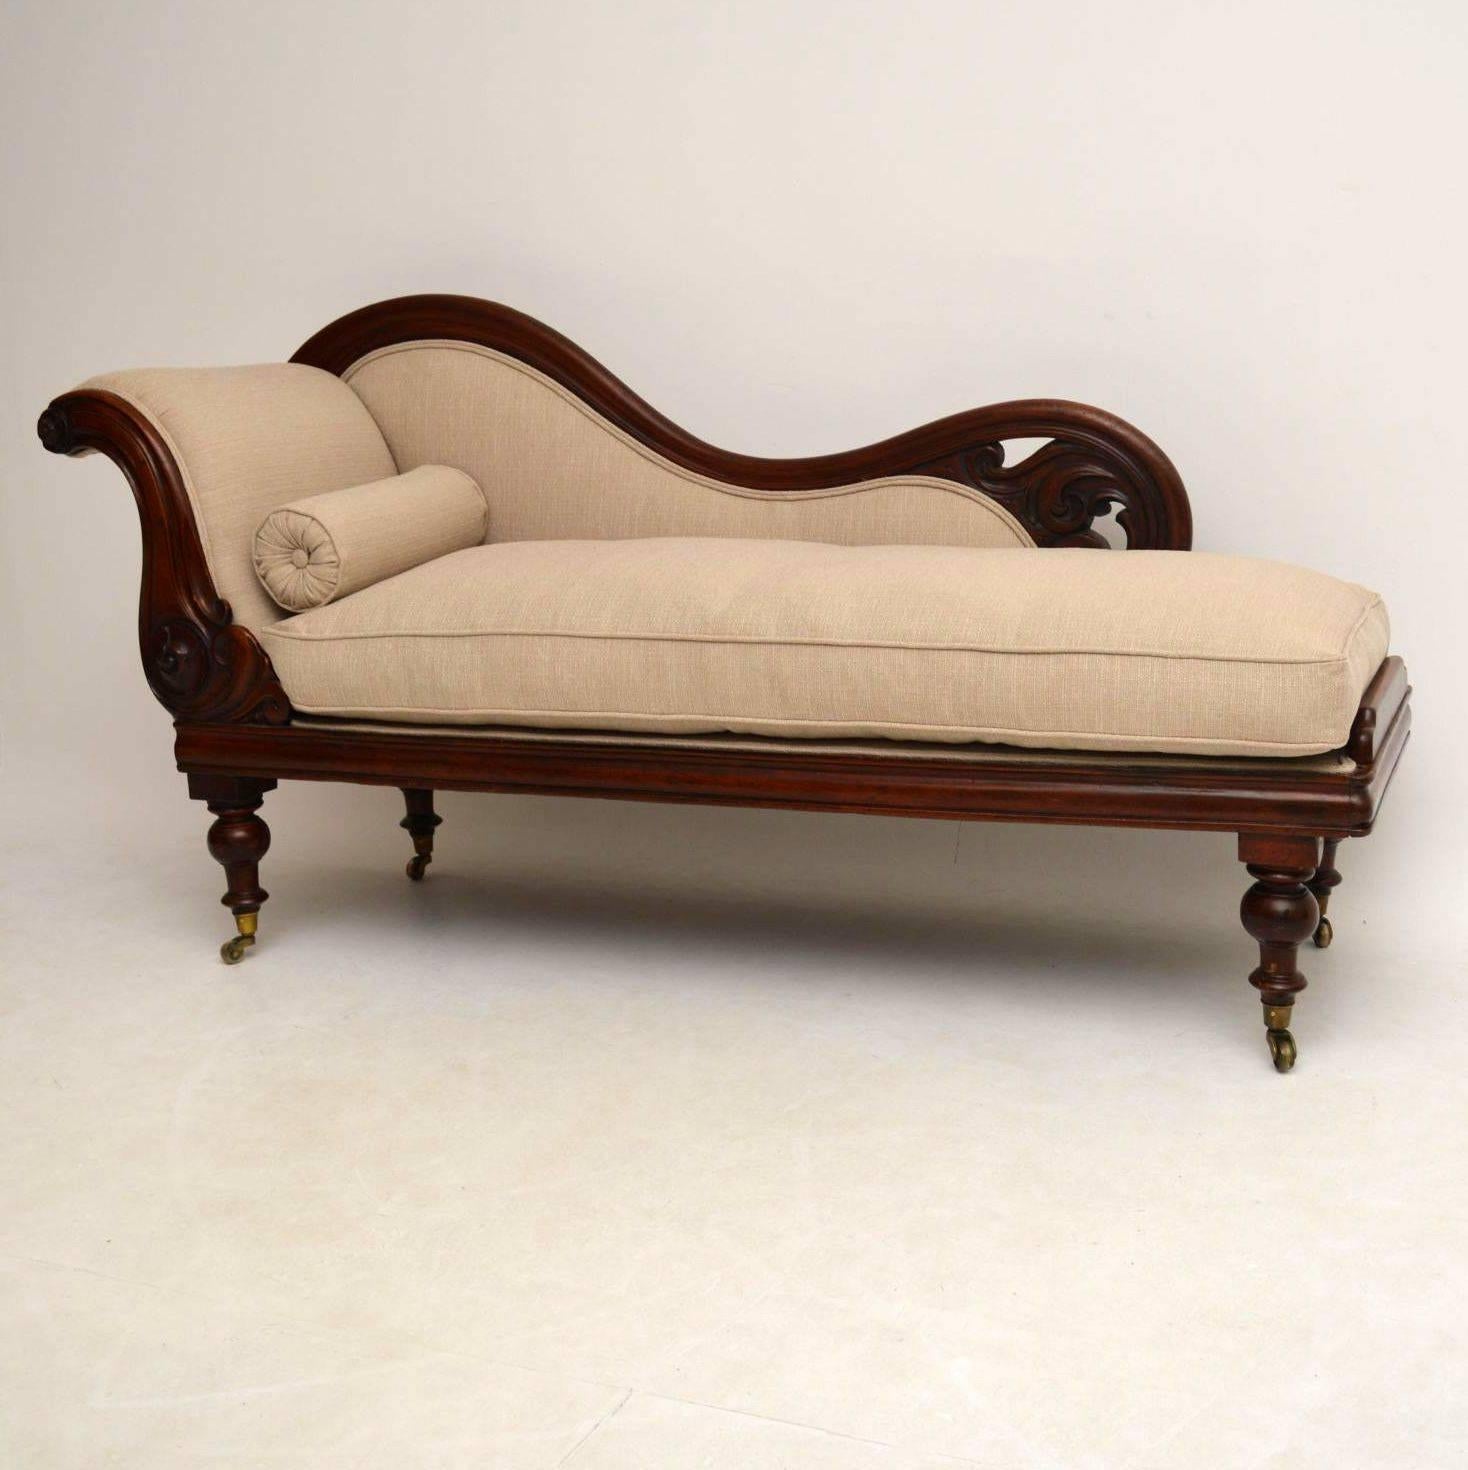 Antique William IV mahogany chaise longue in great condition dating from around the 1830s-1840s period. It's just been French polished and completely re-upholstered in a neutral coloured fabric along with a new seat cushion and bolster. The frame is